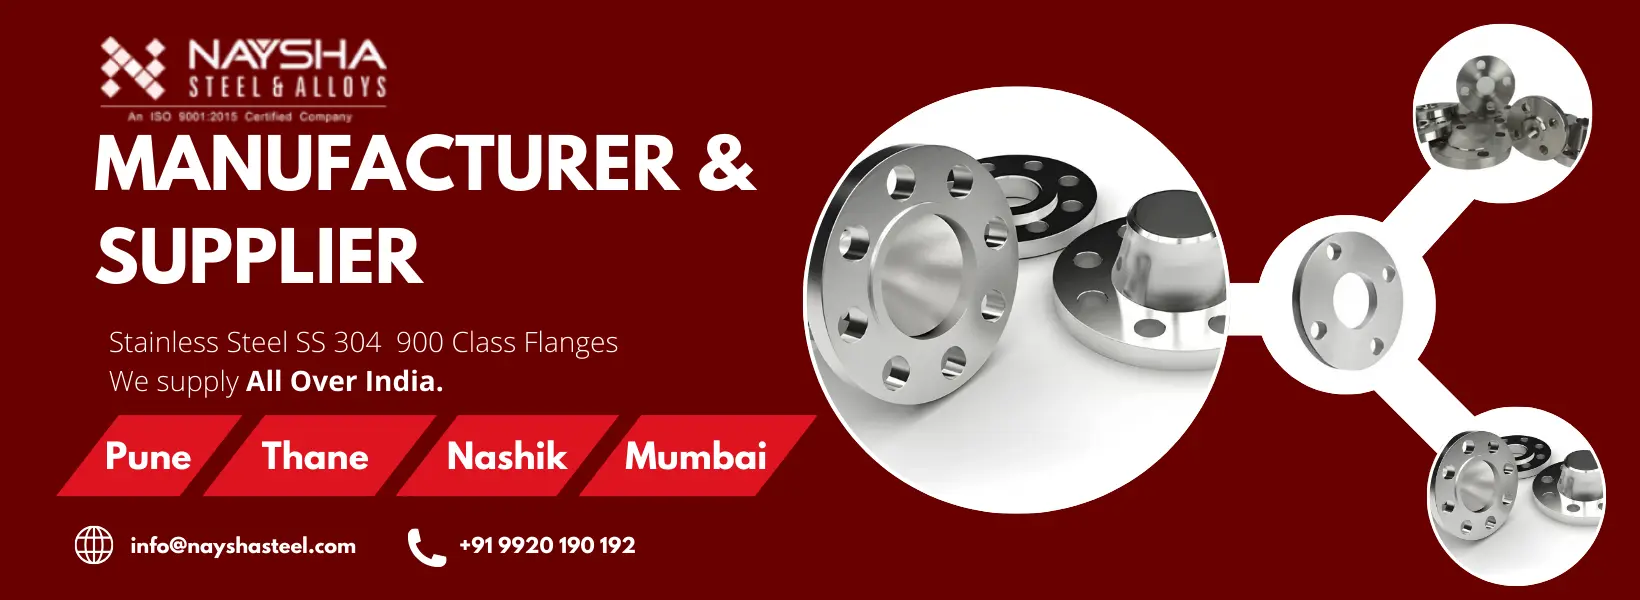 stainless steel 304 900 class flanges banner